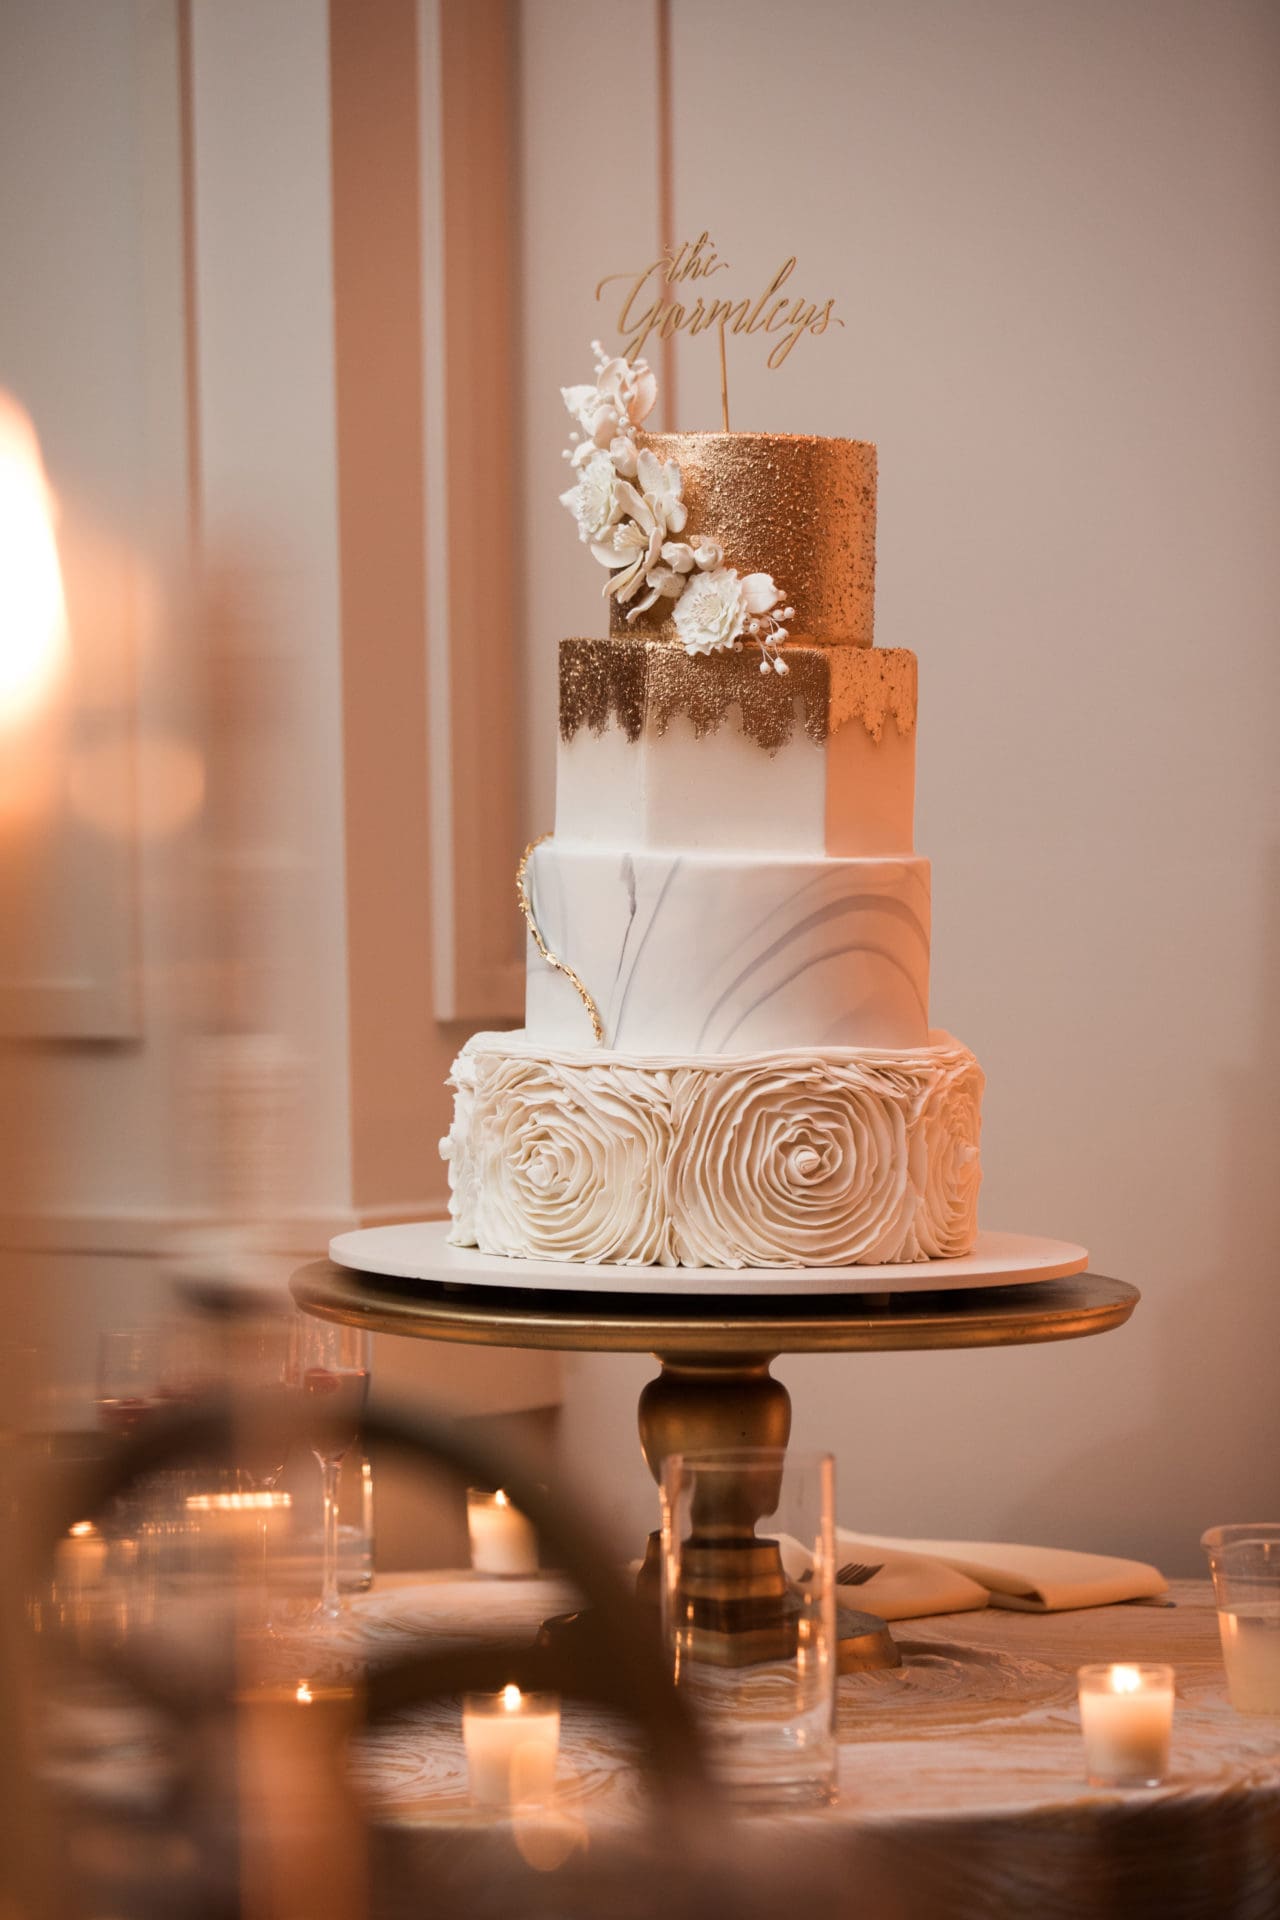 A four tiered wedding cake that is ivory and gold